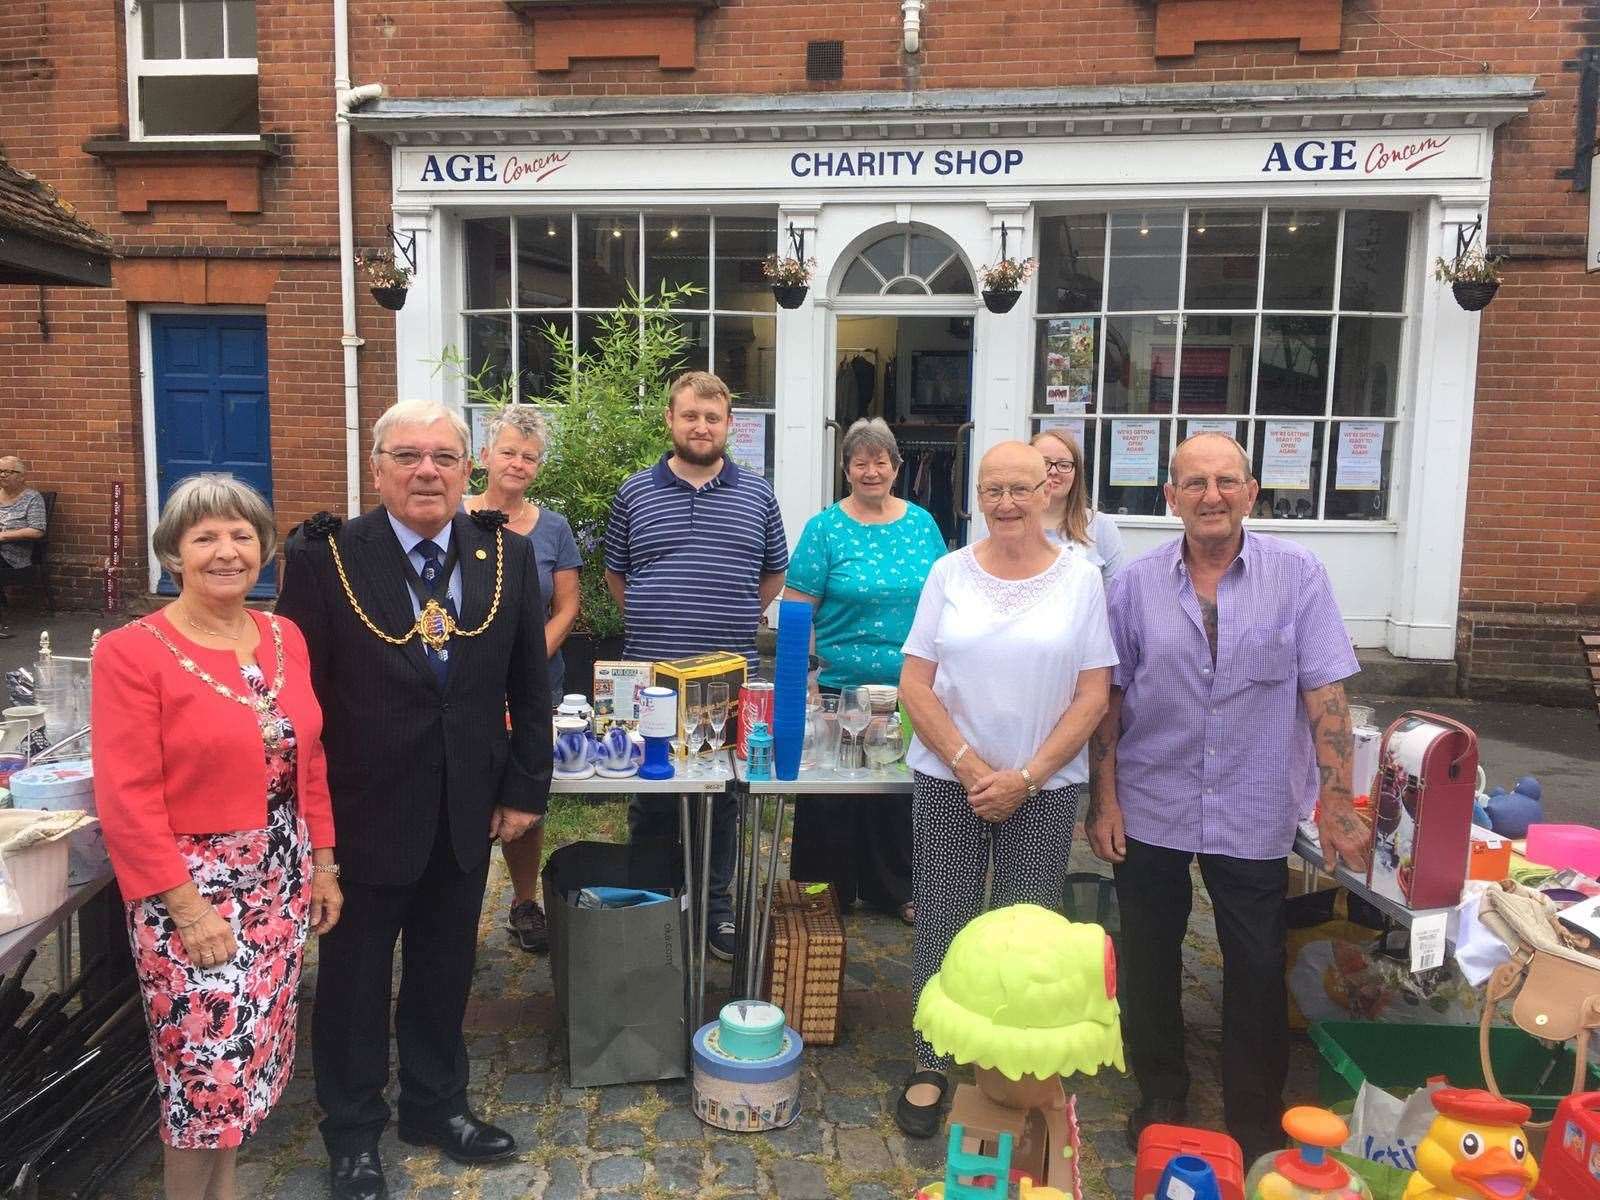 The Mayor and Mayoress of Sandwich Cllr Paul and Sue Graeme join charity shop manager Dan Friend and his team to mark the reopening